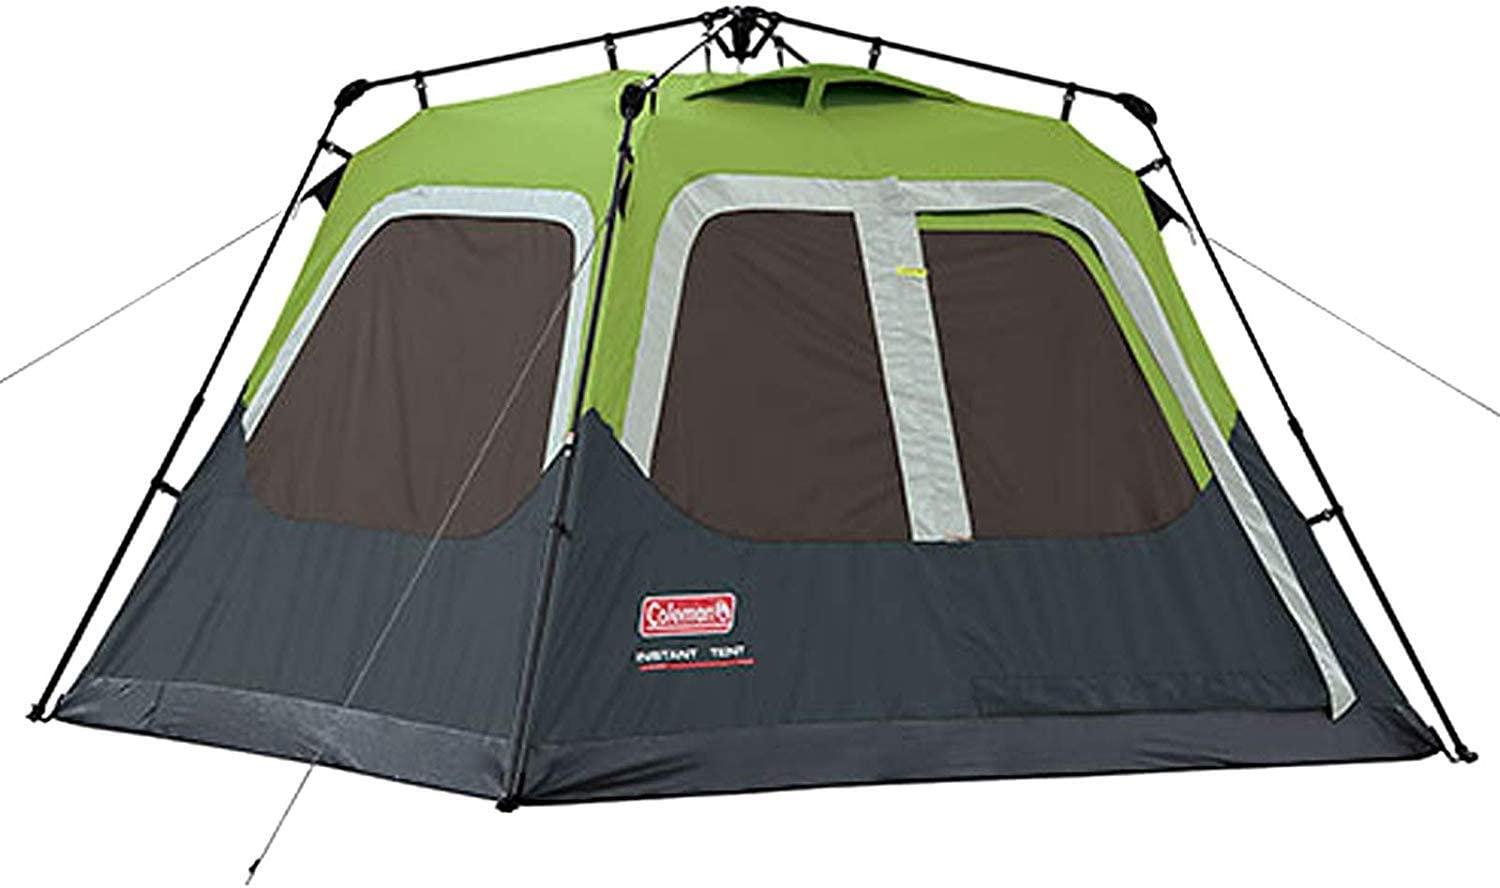 COLEMAN INSTANT TENT 8 person WITH RAIN FLY